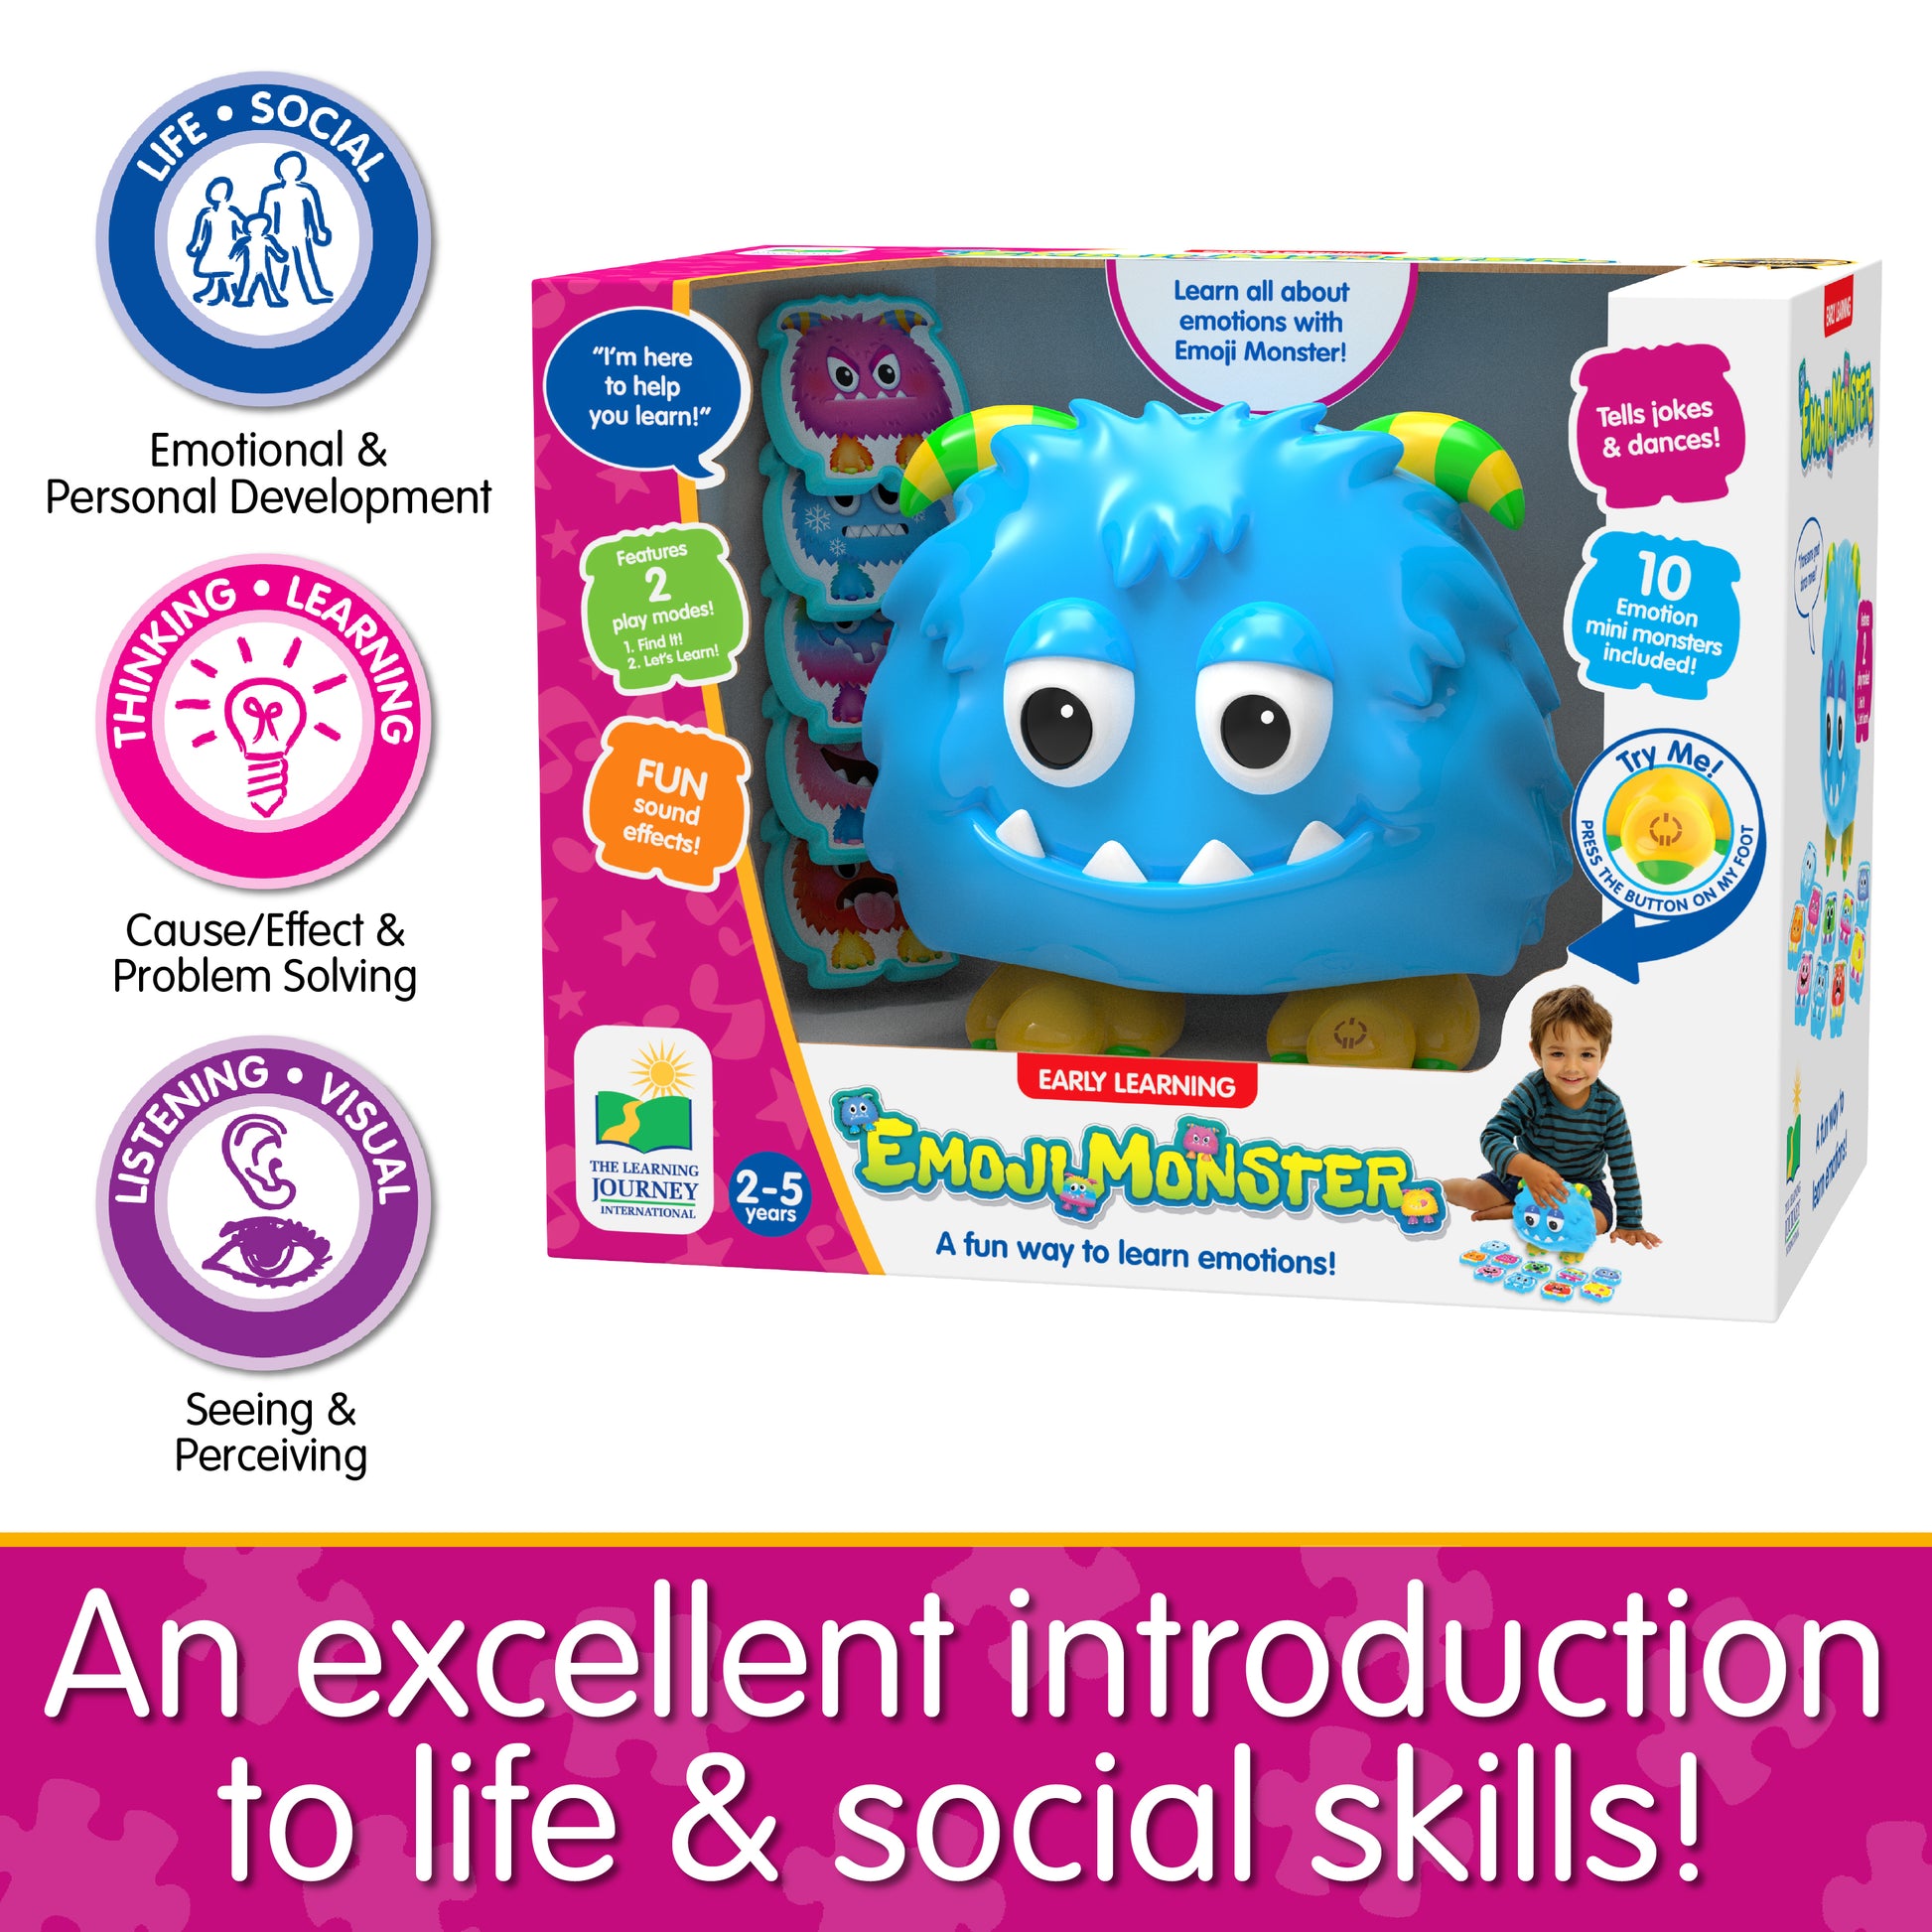 Infographic about Emoji Monster's educational benefits that says, "An excellent introduction to life and social skills!"